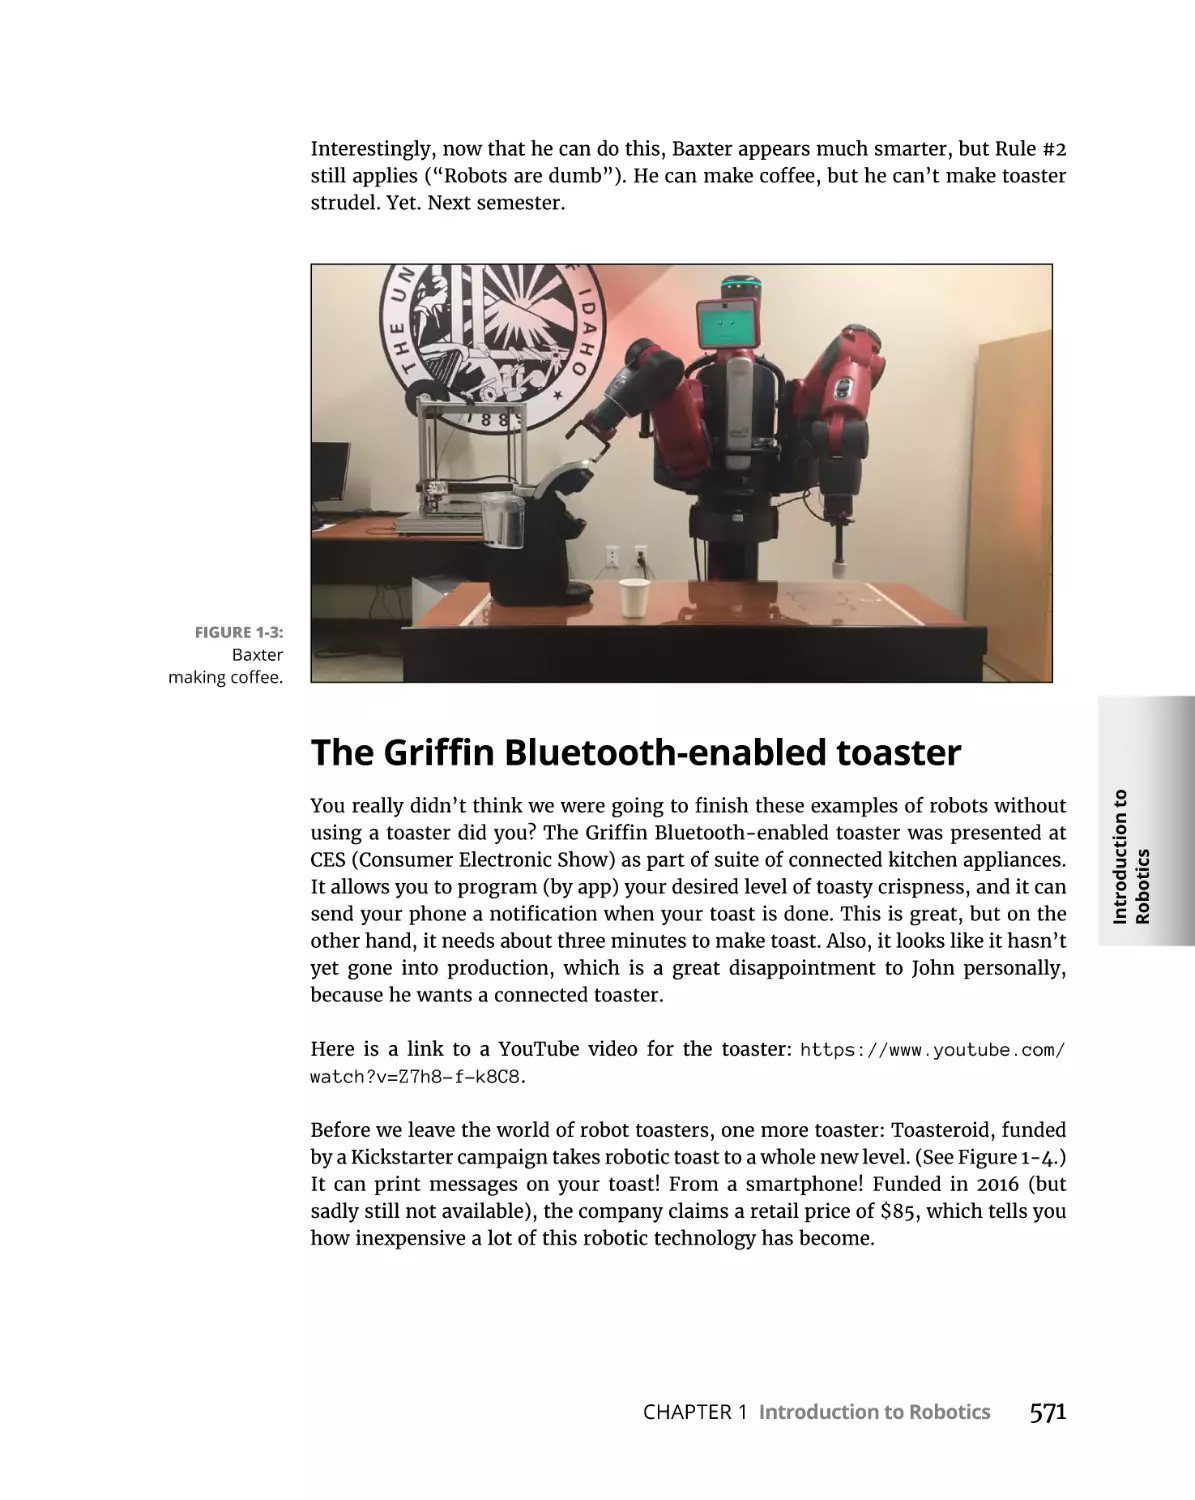 The Griffin Bluetooth-enabled toaster